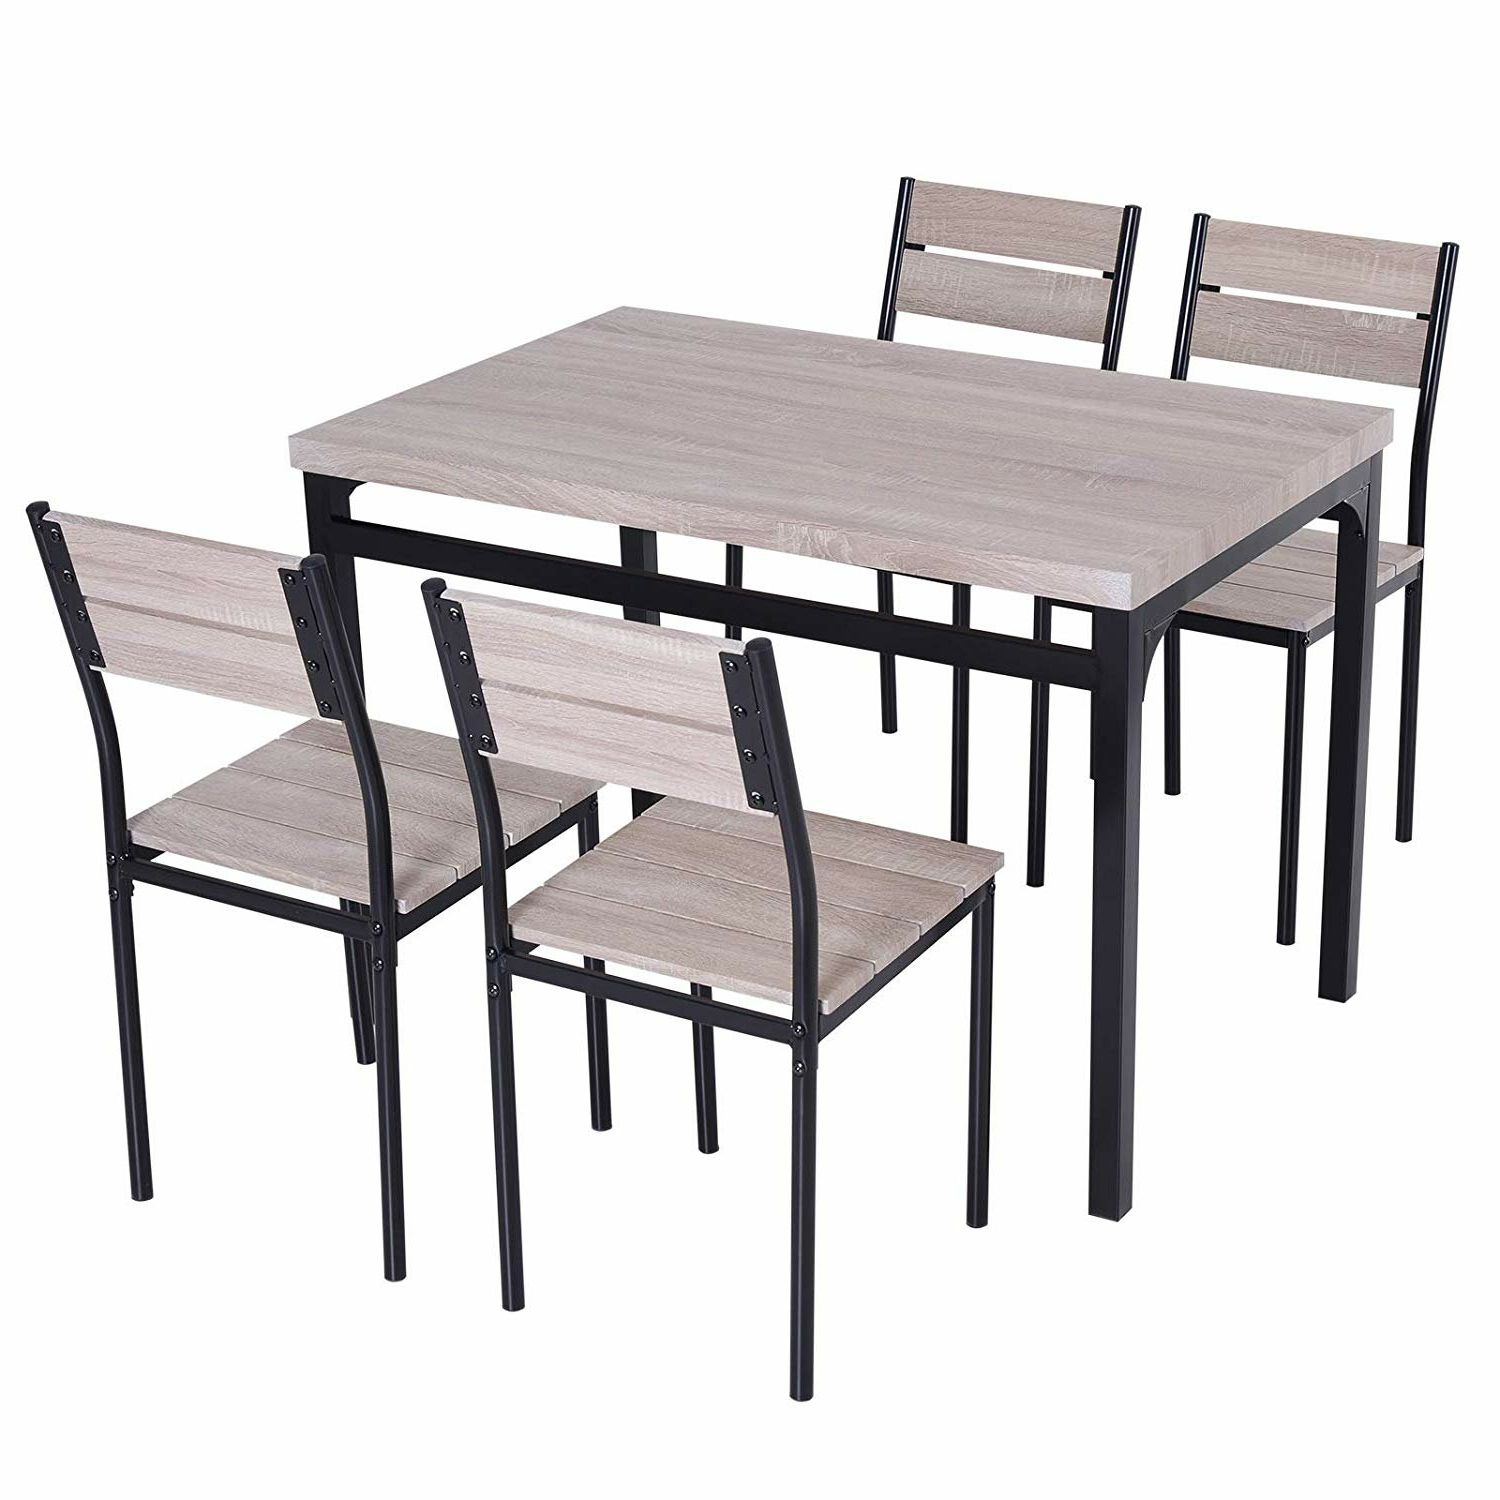 Wayfair Within Stouferberg 5 Piece Dining Sets (View 13 of 25)